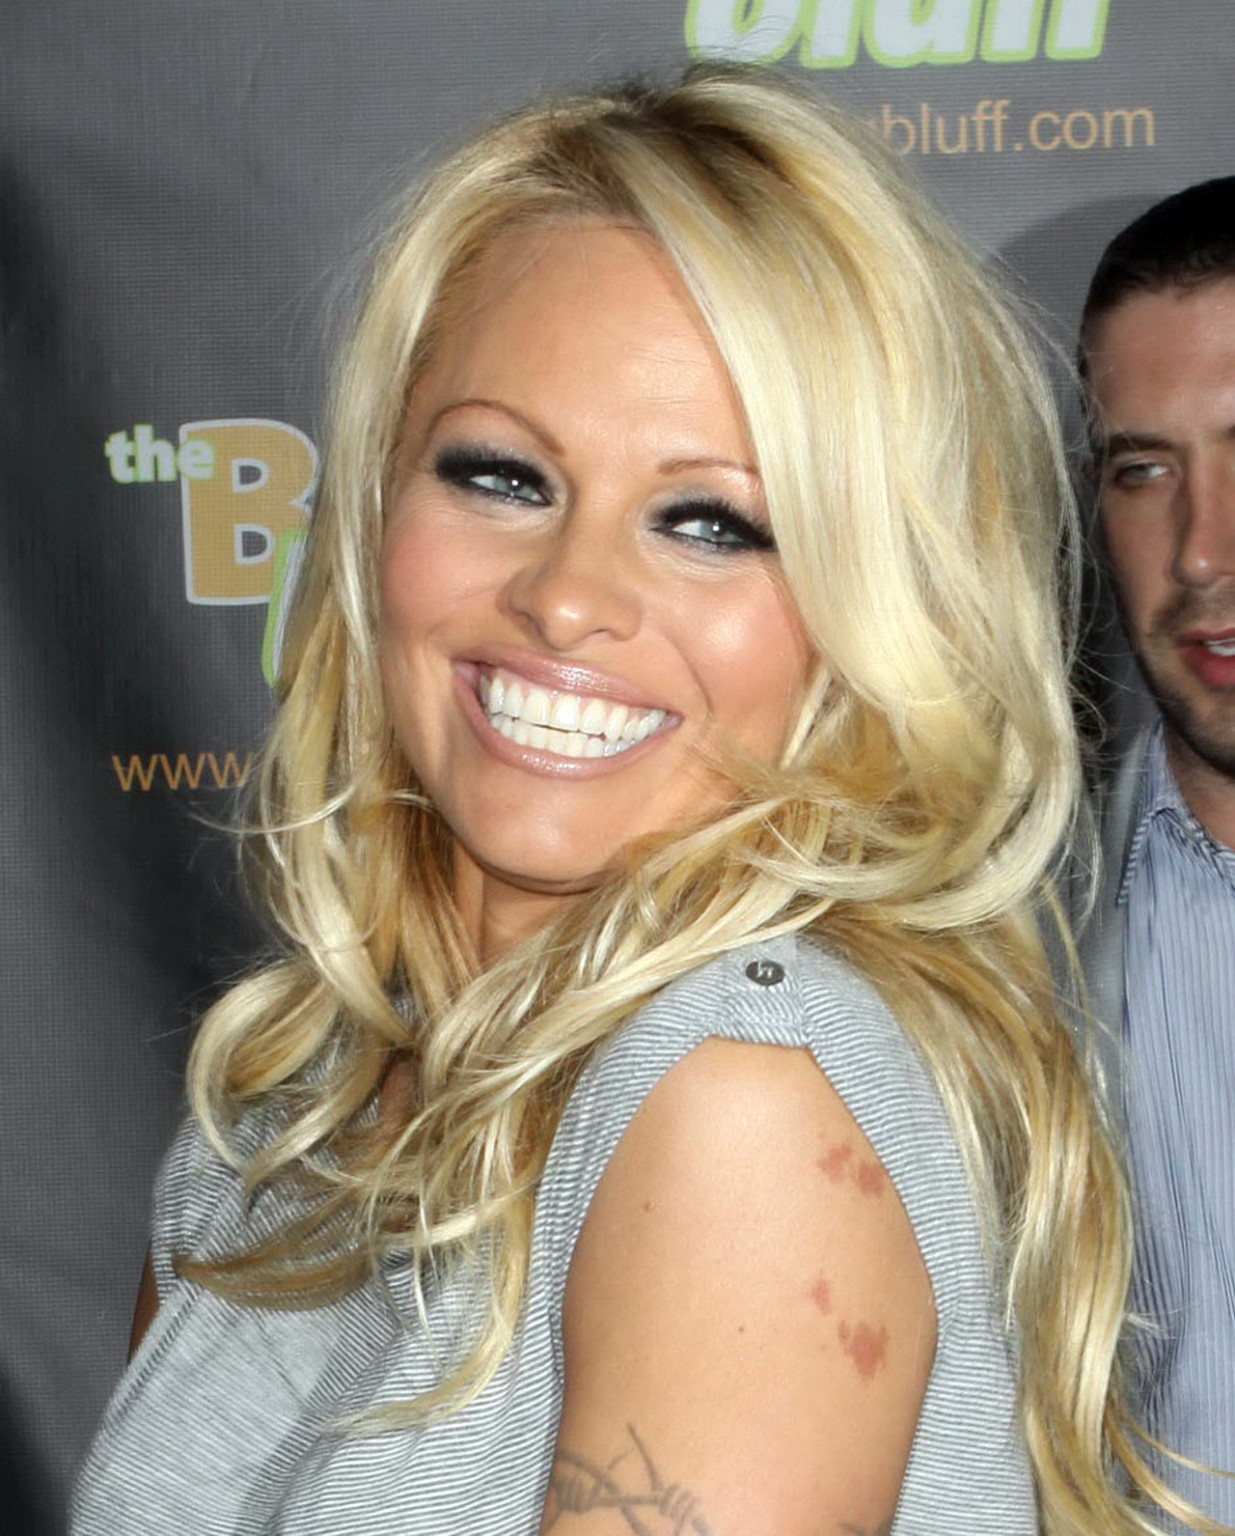 Pamela Anderson leggy in mini dress at 'The Big Bluff' online game launch #75348112